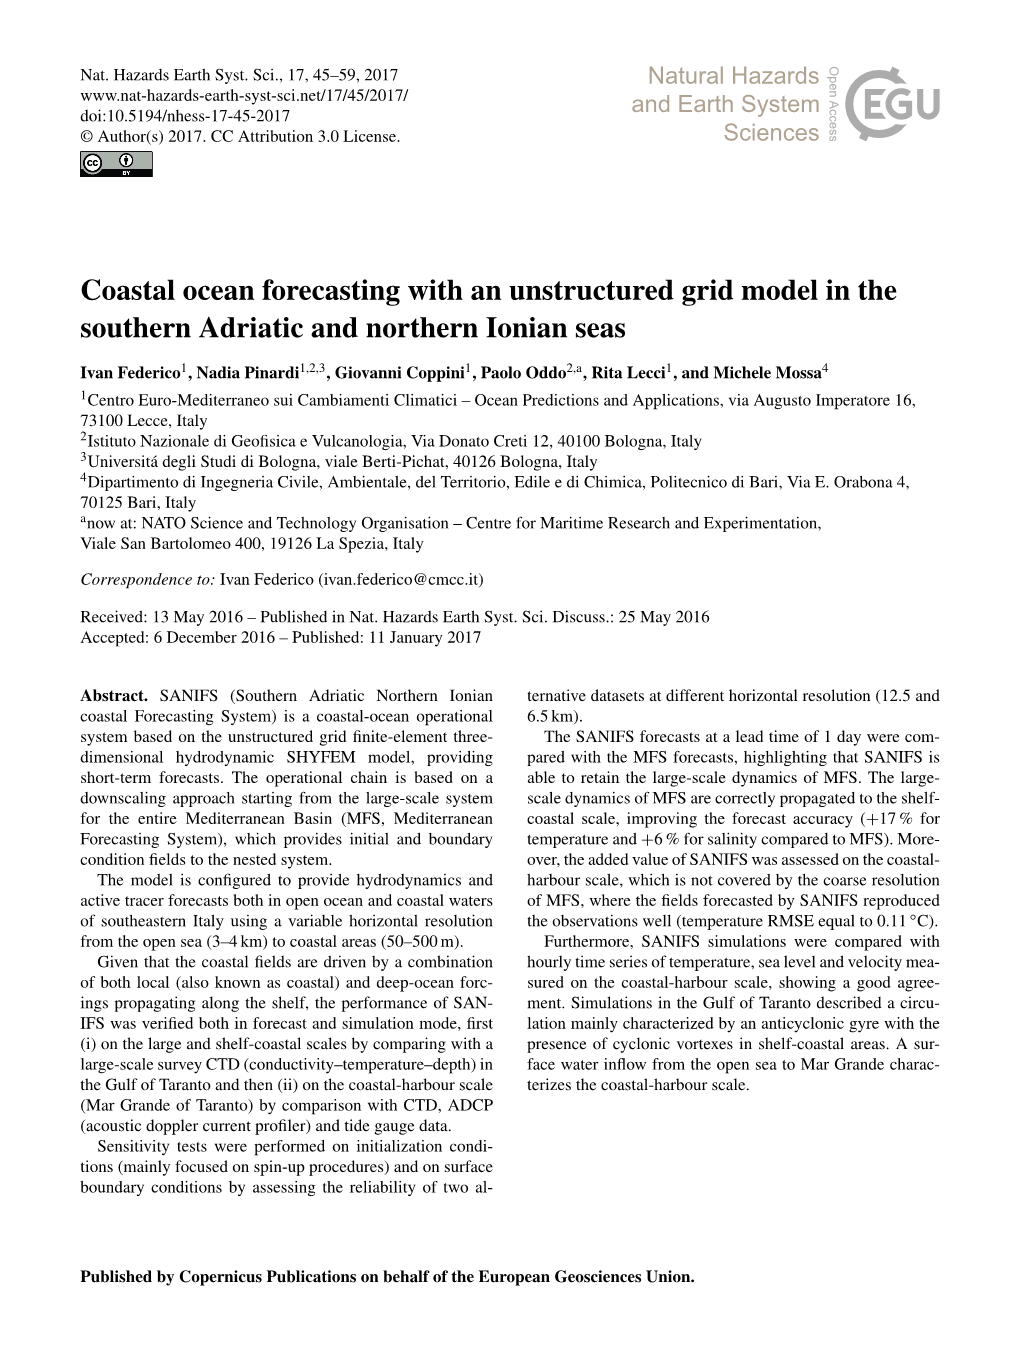 Coastal Ocean Forecasting with an Unstructured Grid Model in the Southern Adriatic and Northern Ionian Seas